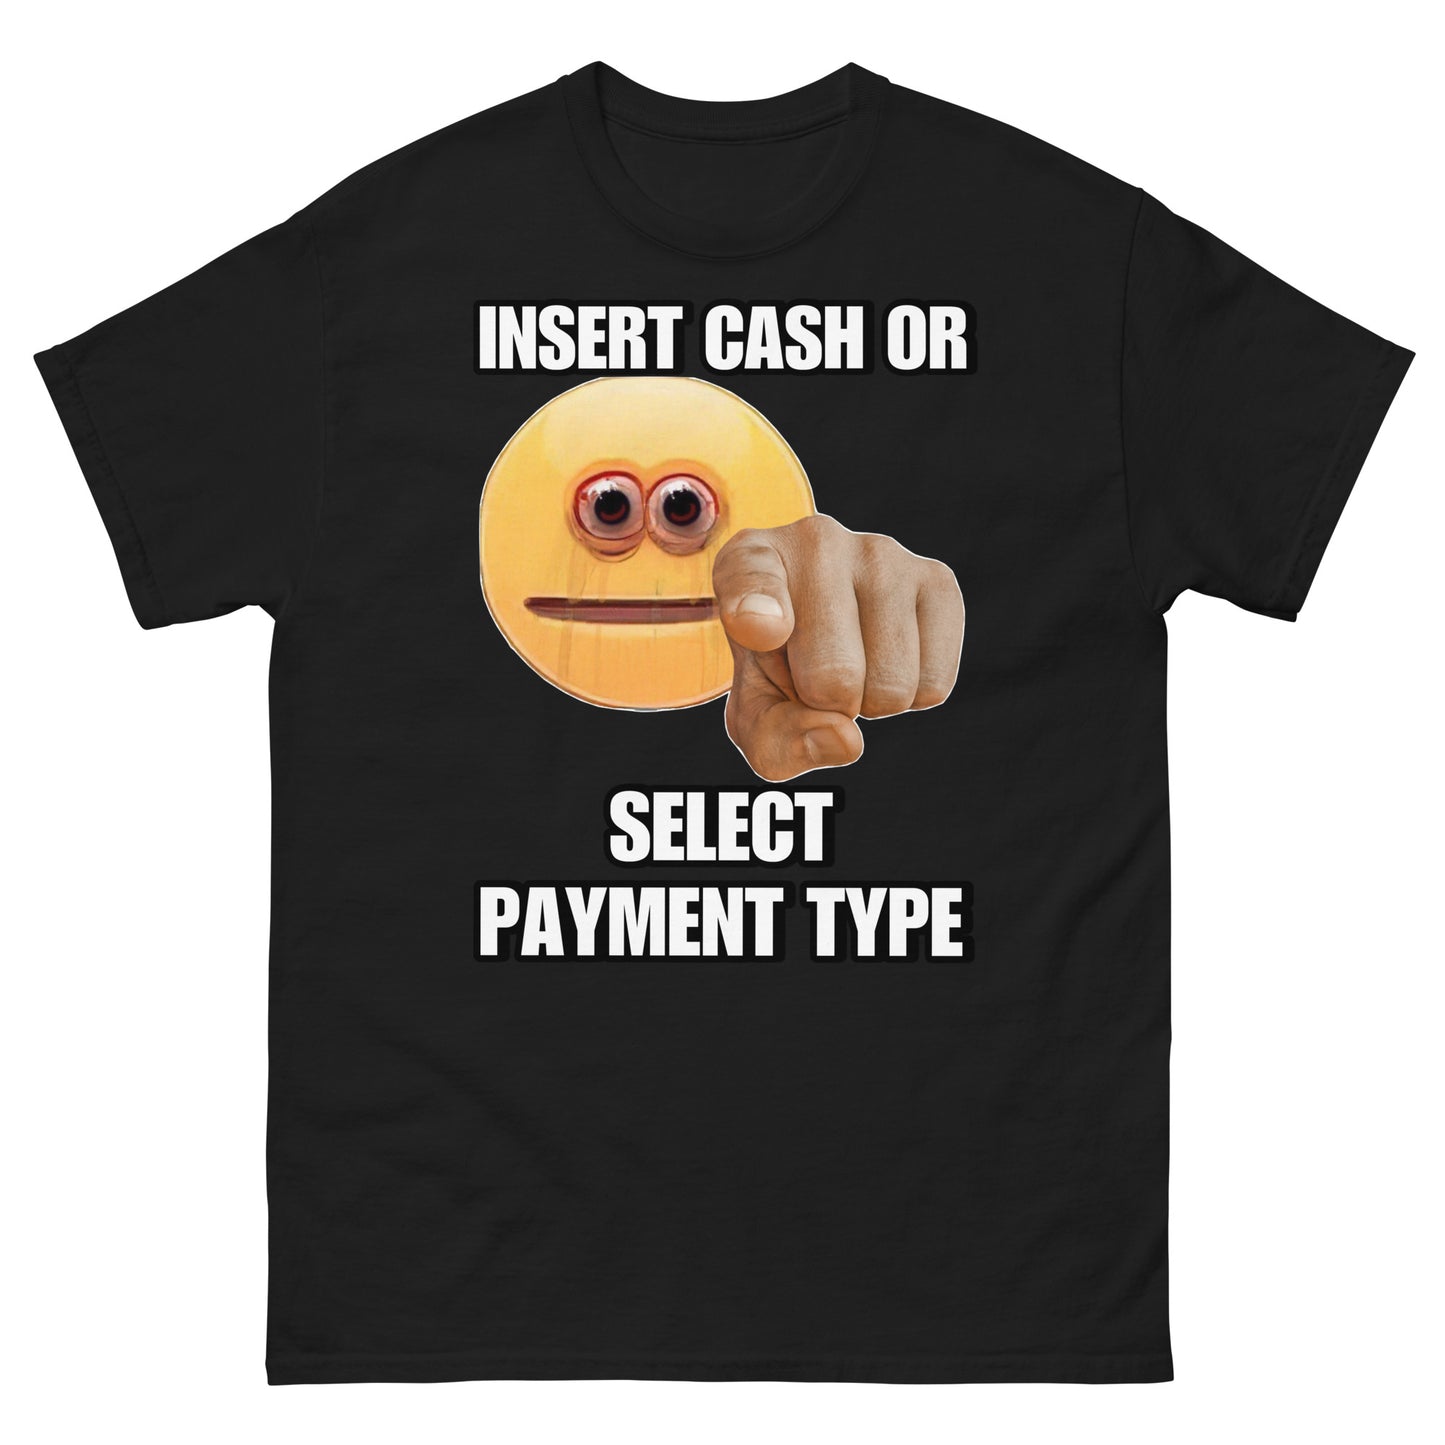 Insert Cash or Select Payment Type Cringey Tee